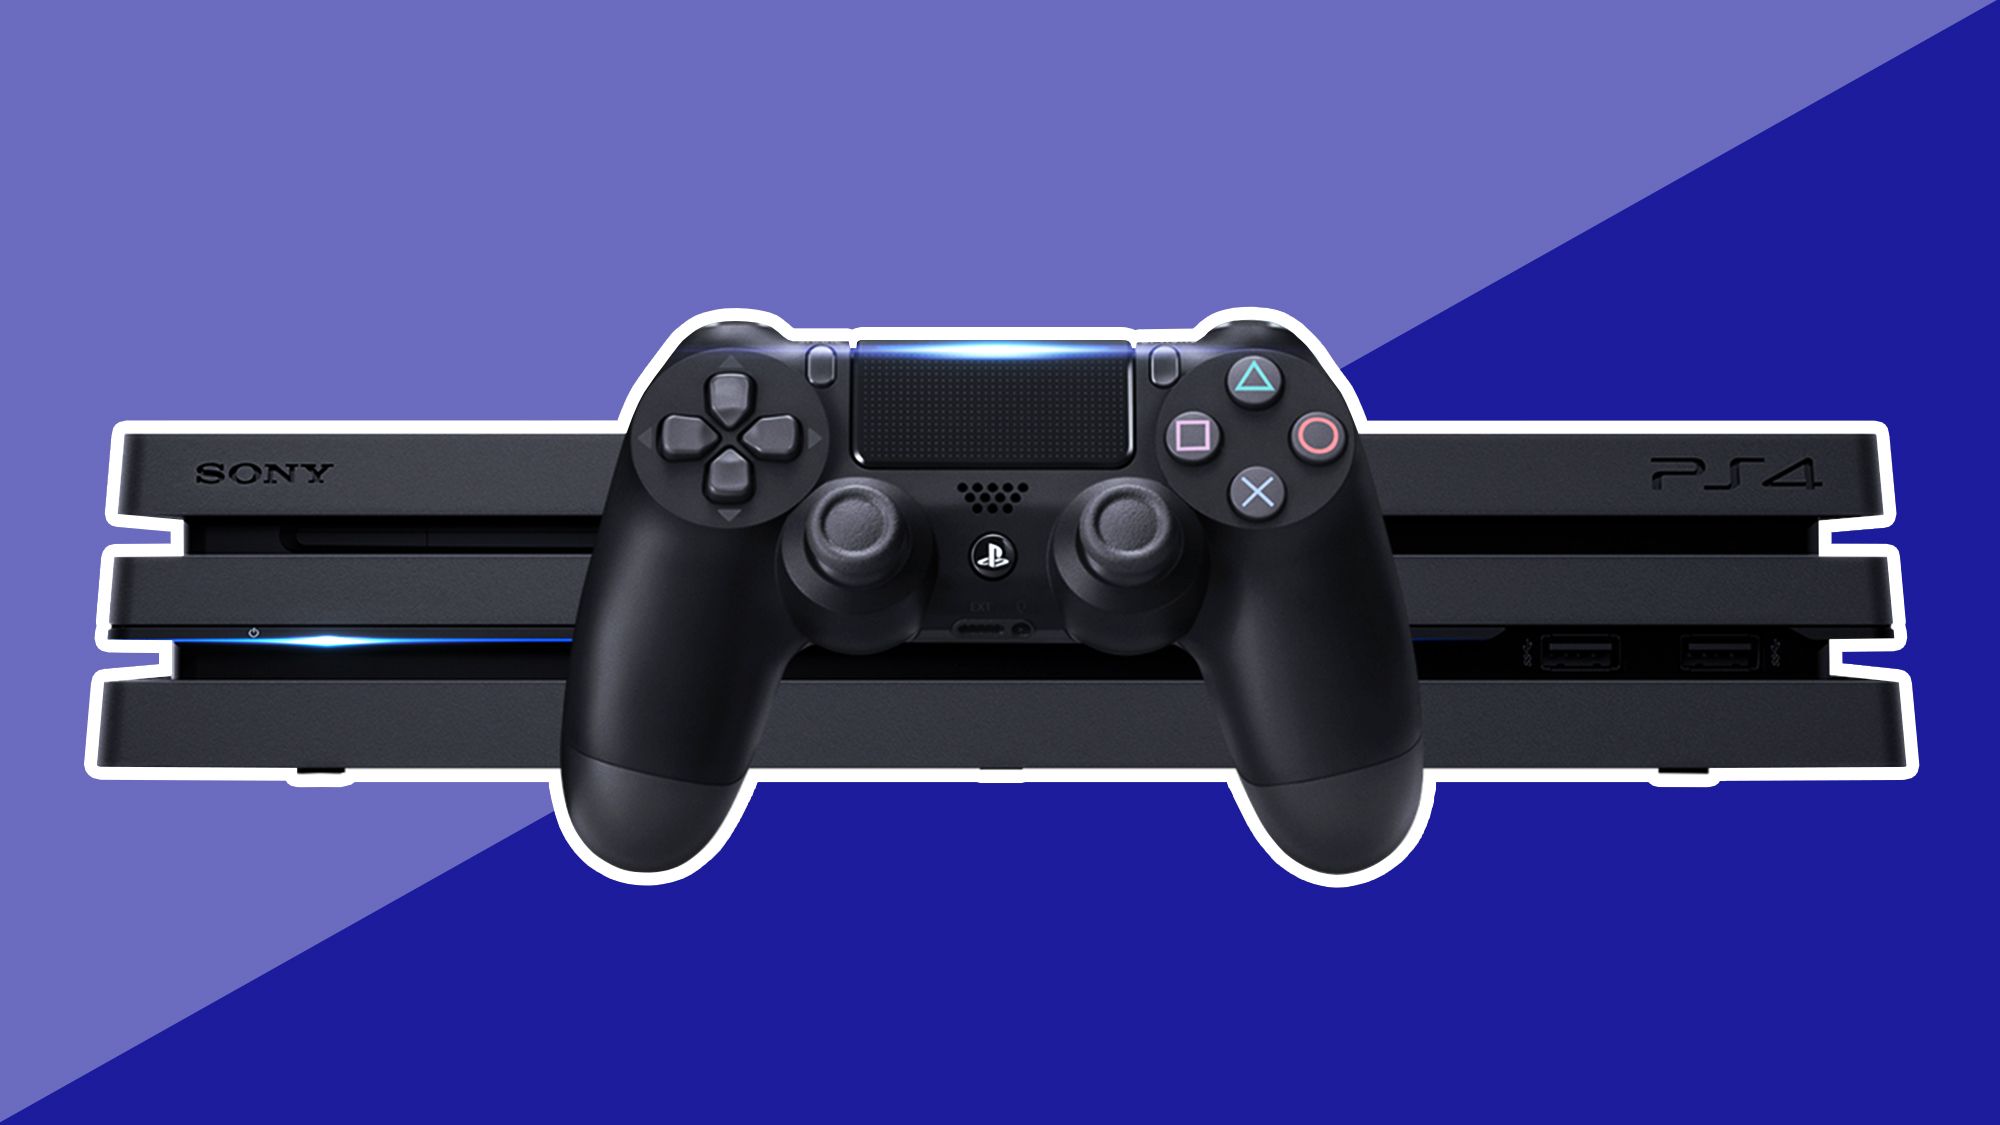 Perle Panda Igangværende Which Playstation 4 Should You Buy - PS4 vs PS4 Pro vs PS4 Slim